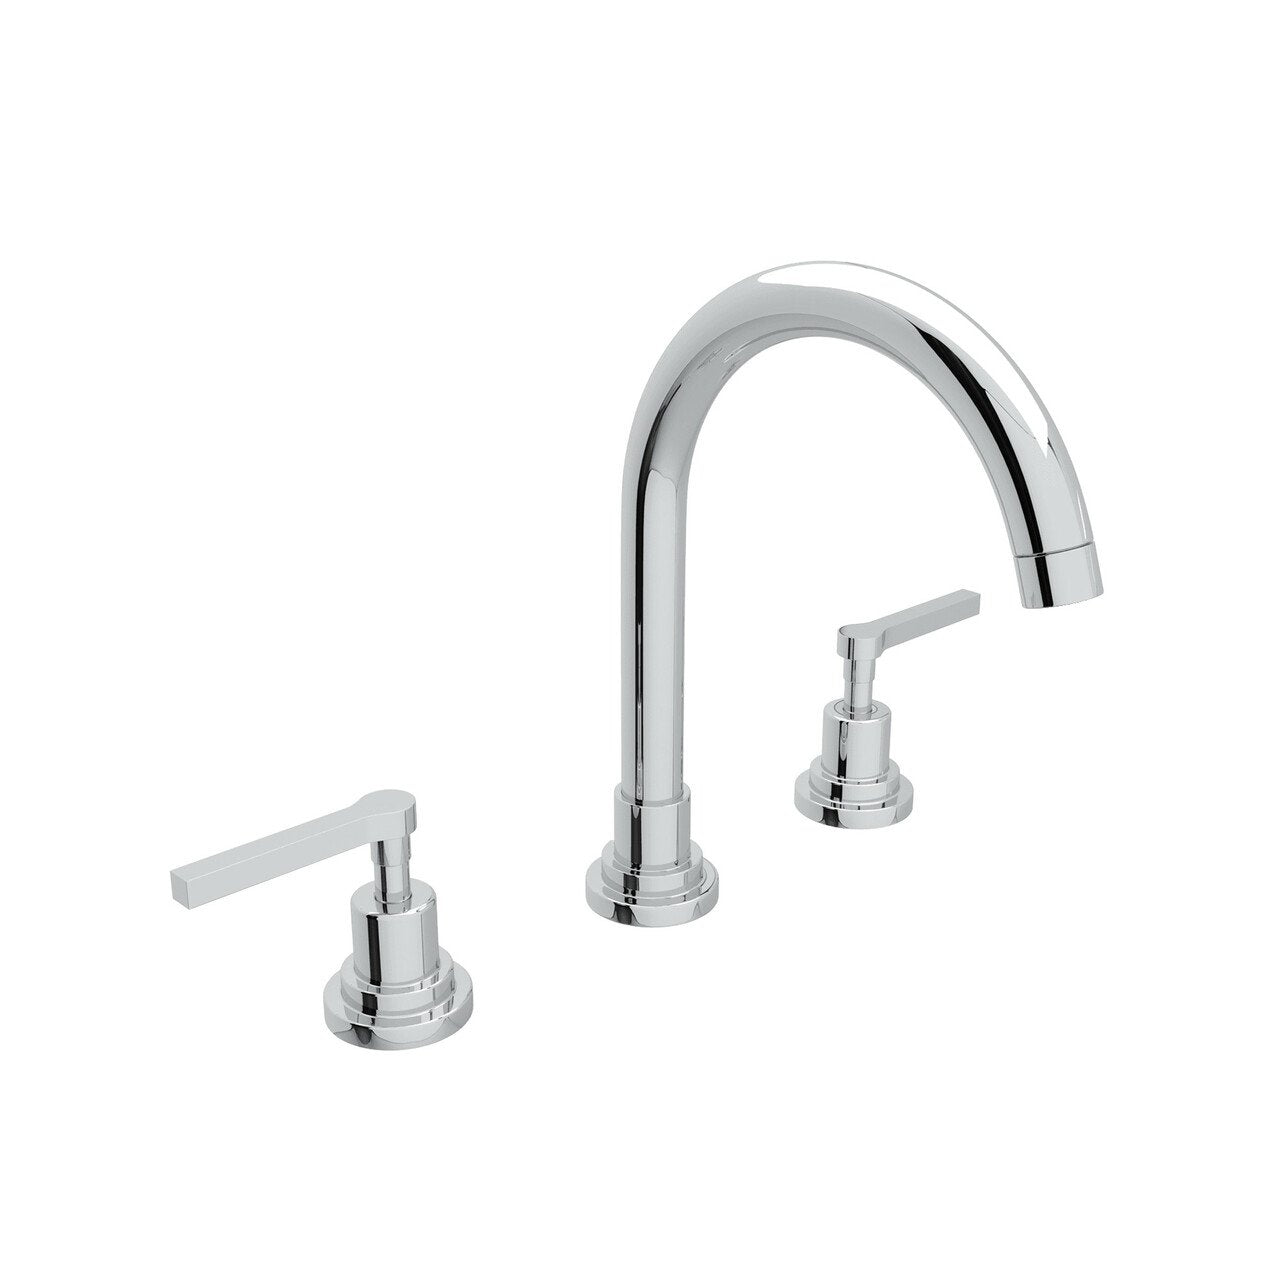 ROHL Lombardia C-Spout Widespread Bathroom Faucet - BNGBath